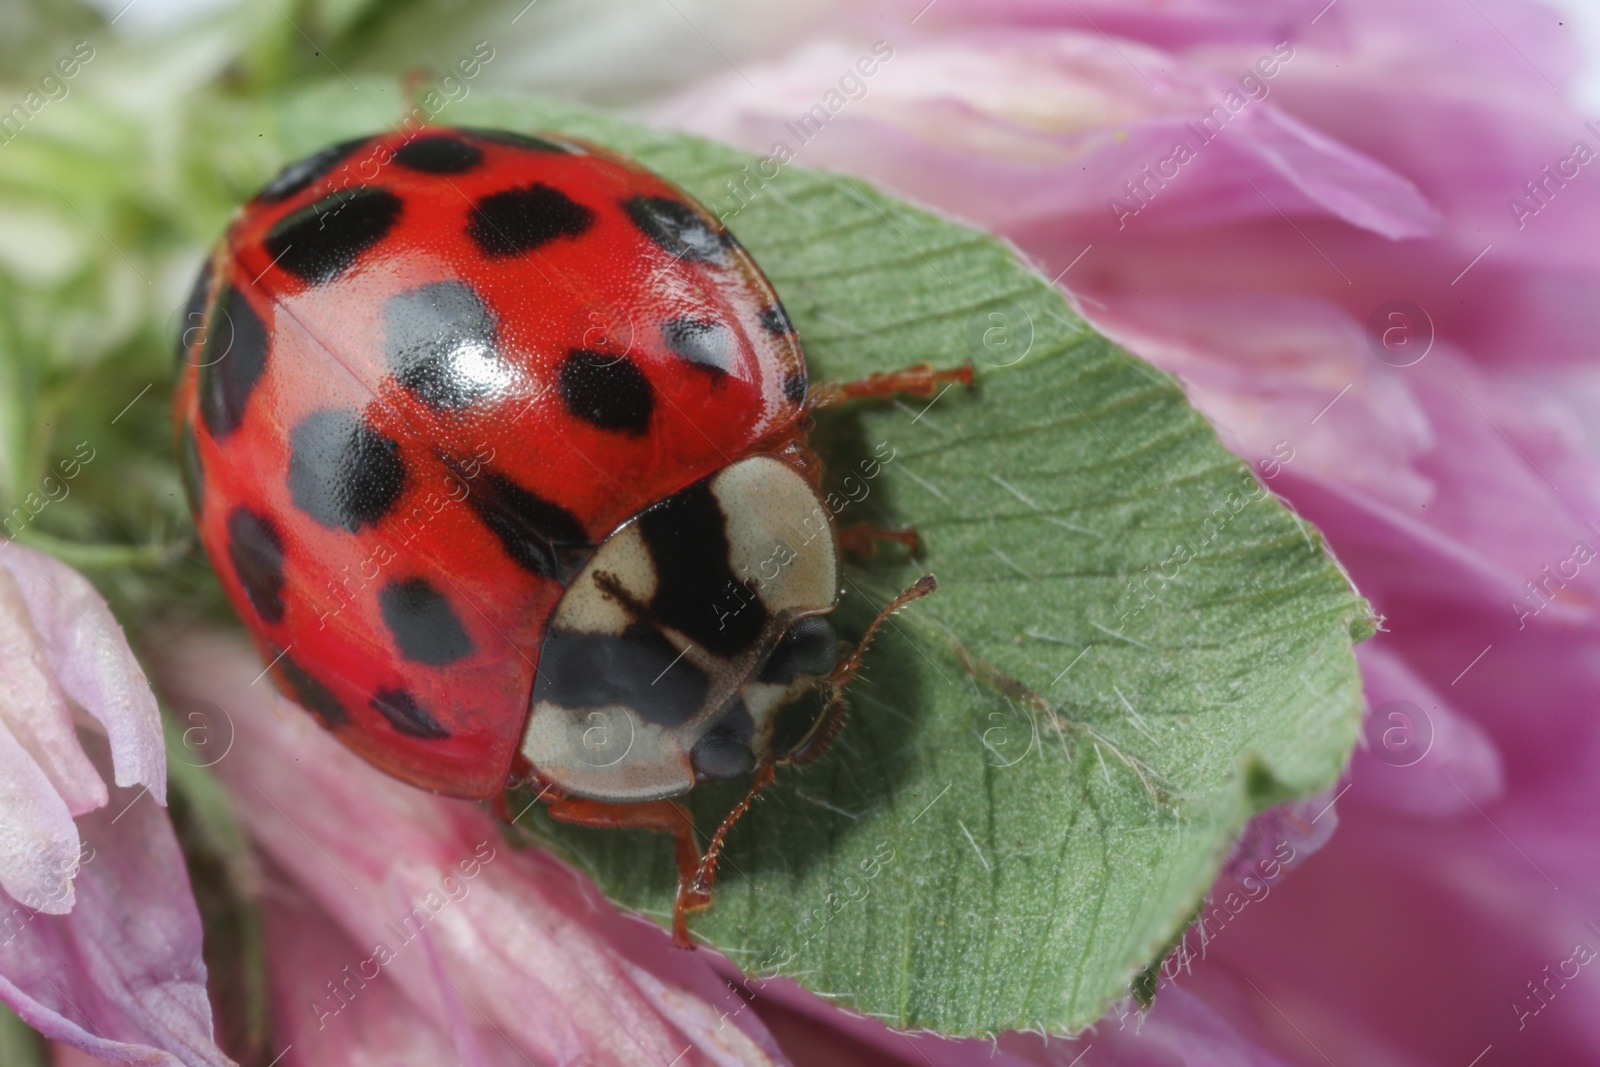 Photo of Red ladybug on green leaf of pink flower, macro view